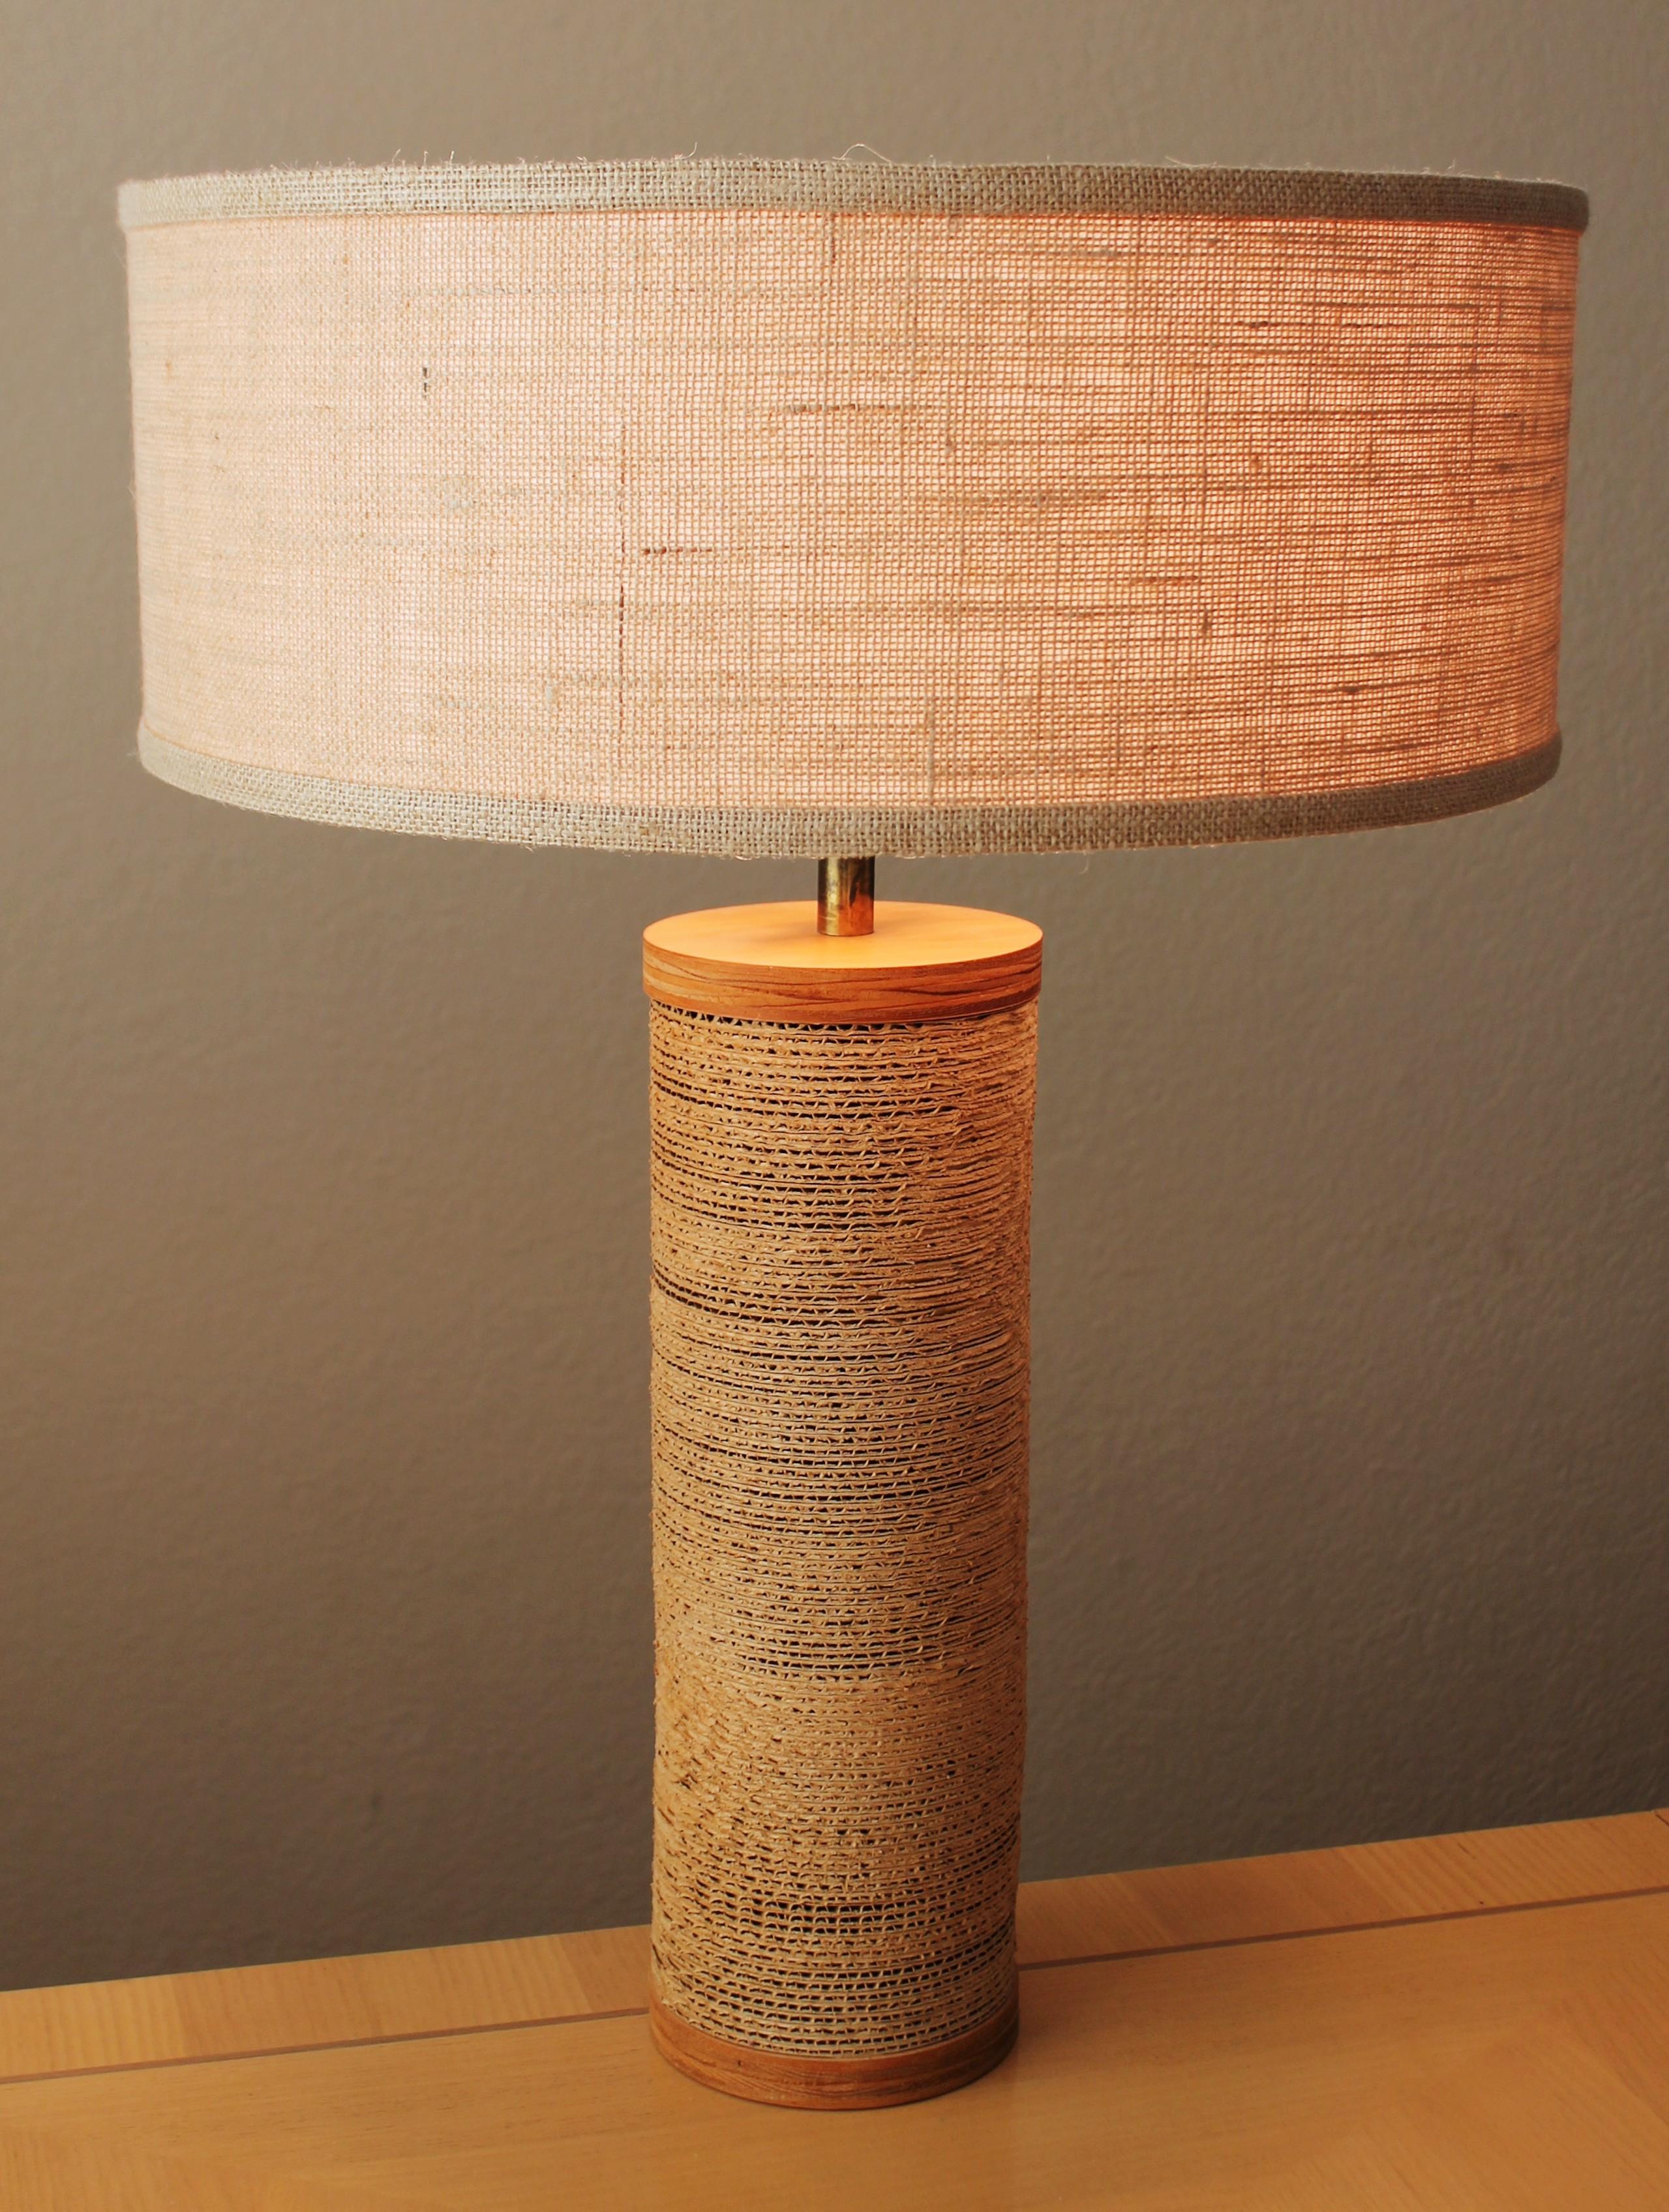 
MINTY & RARE!

MID CENTURY MODERN
GREGORY VAN PELT
CORRUGATED BOARD
TABLE  LAMP!

AN EXQUISITE EXAMPLE!

DIMENSIONS: APPROX. 28